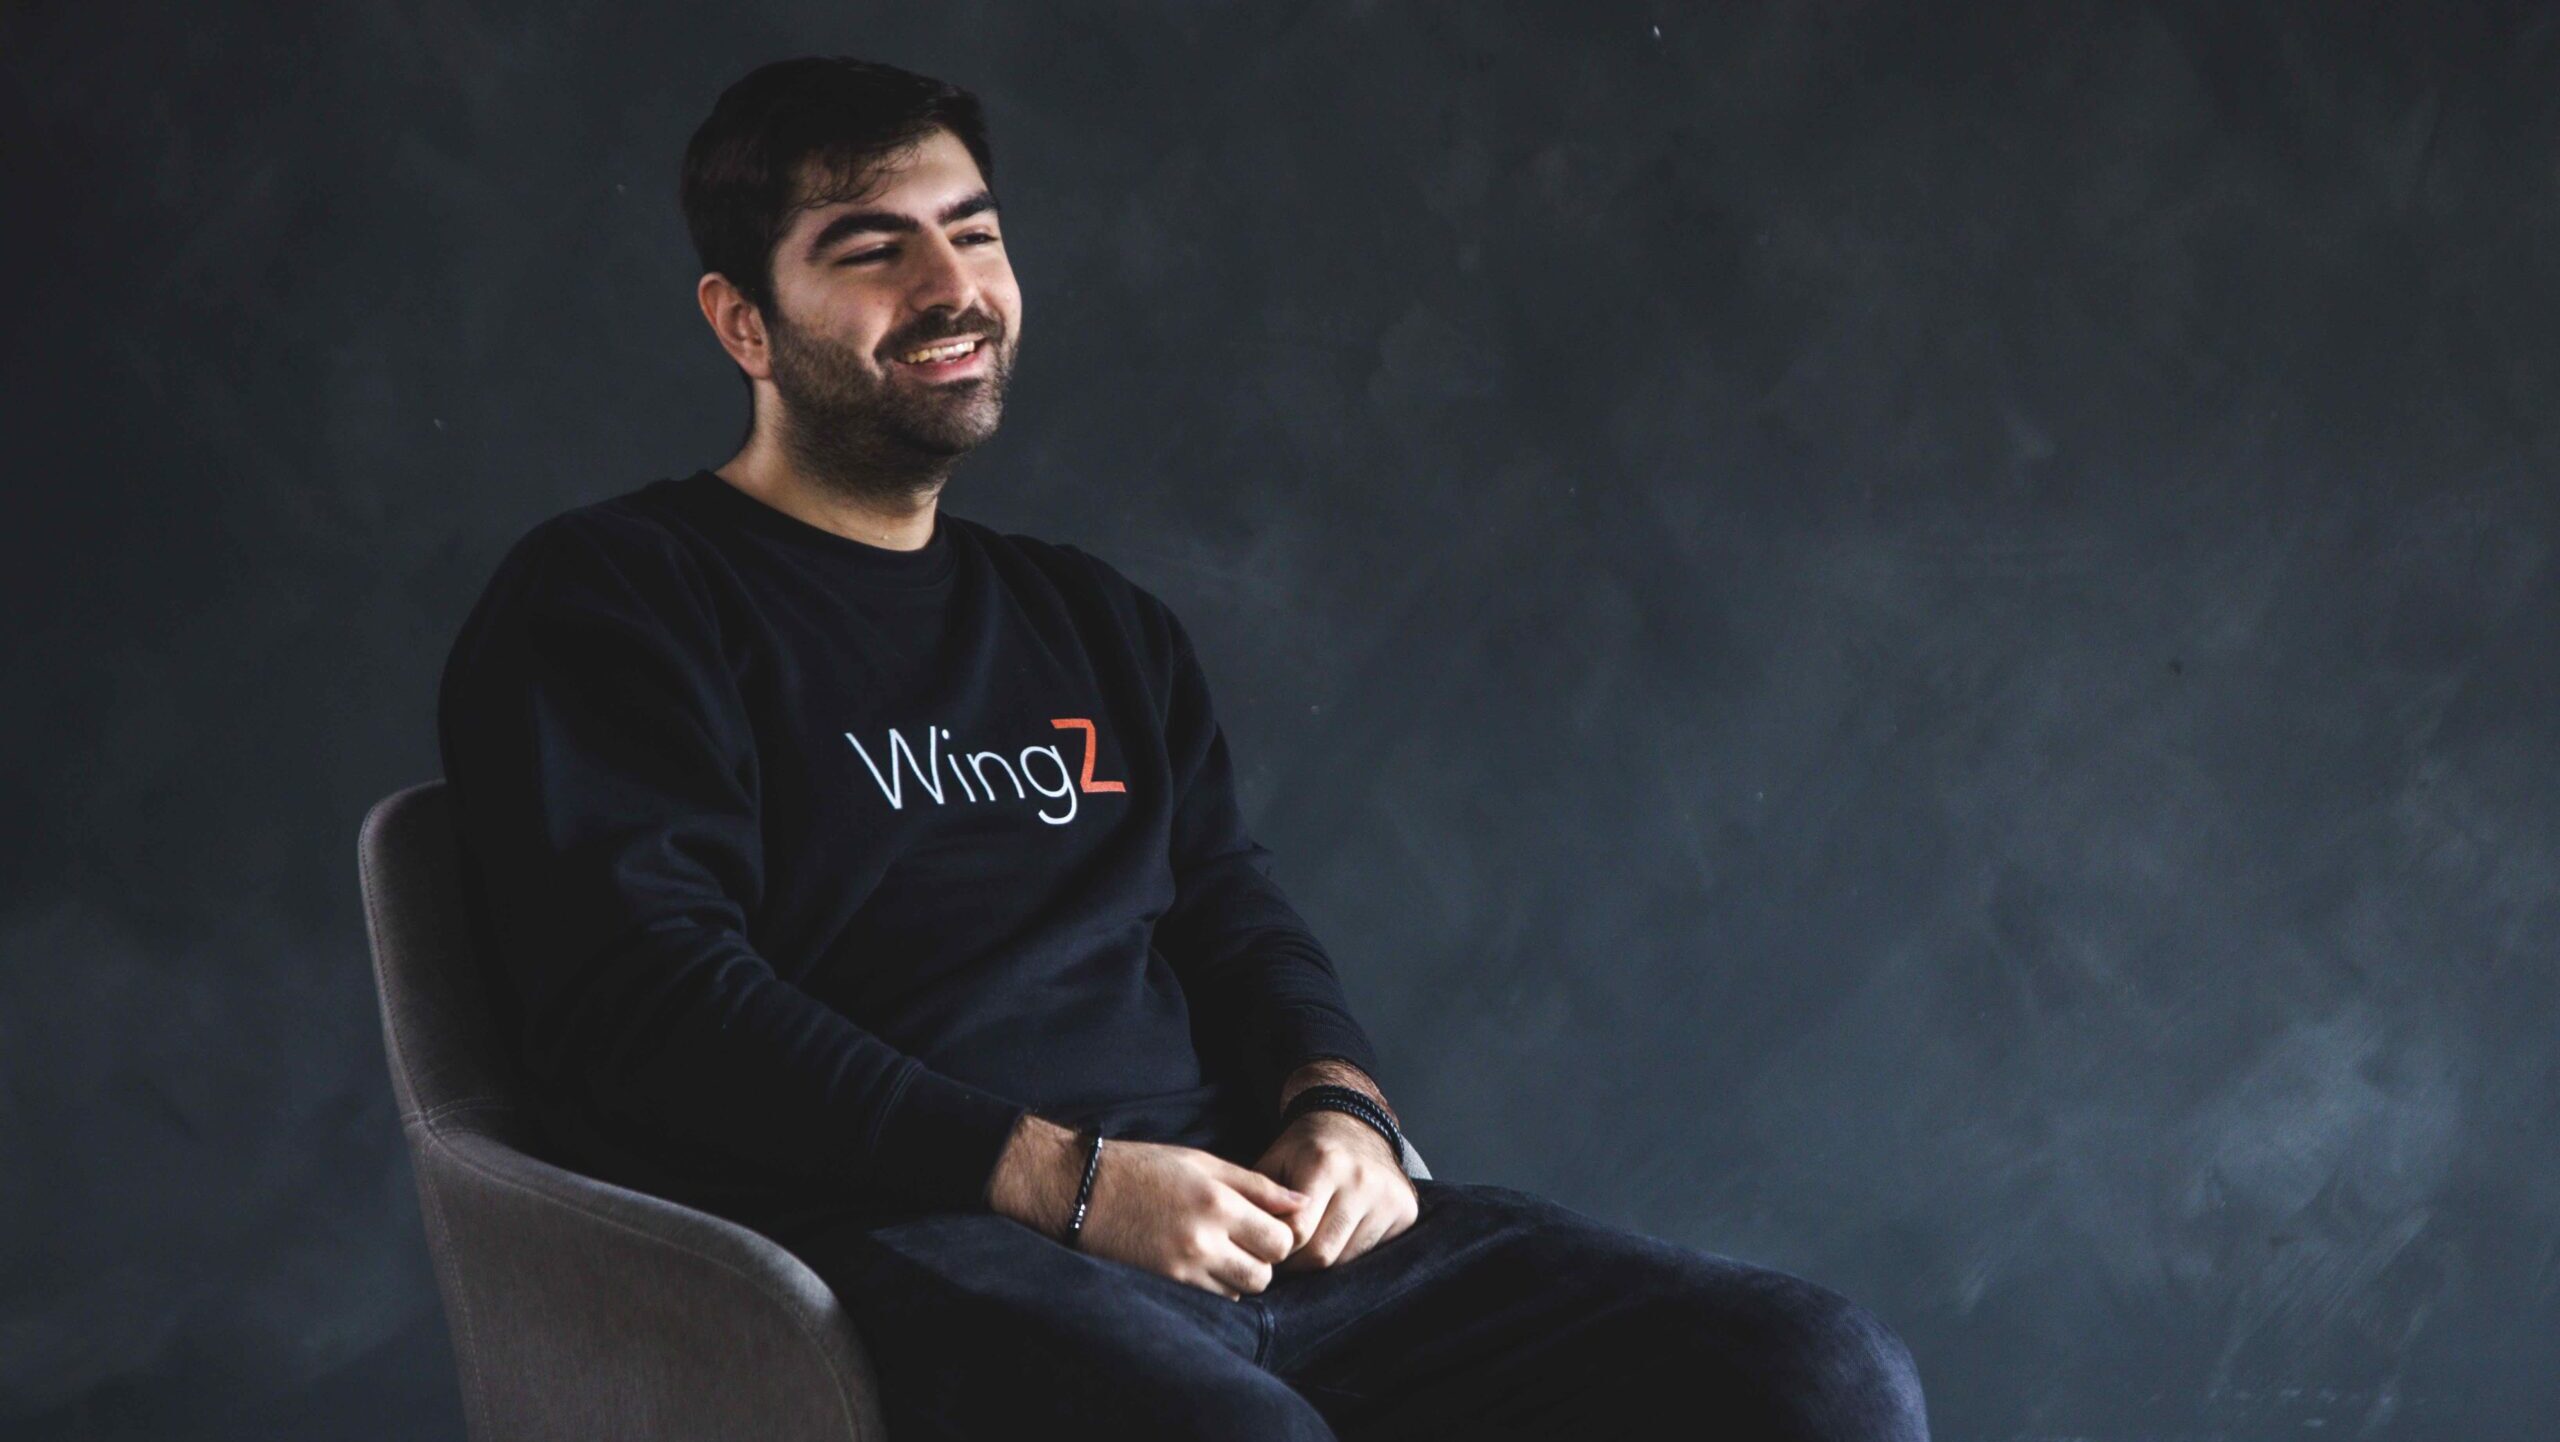 WingZ's Hossein Rezai, wearing a WingZ t-shirt, sitting in a chair against a dark grey backdrop and smiling